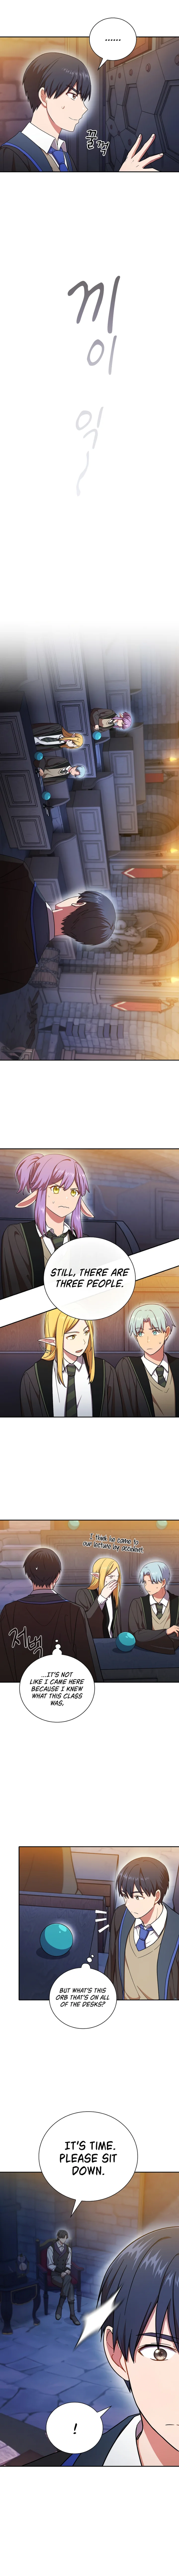 Magic Academy Survival Guide - Chapter 14 Page 5